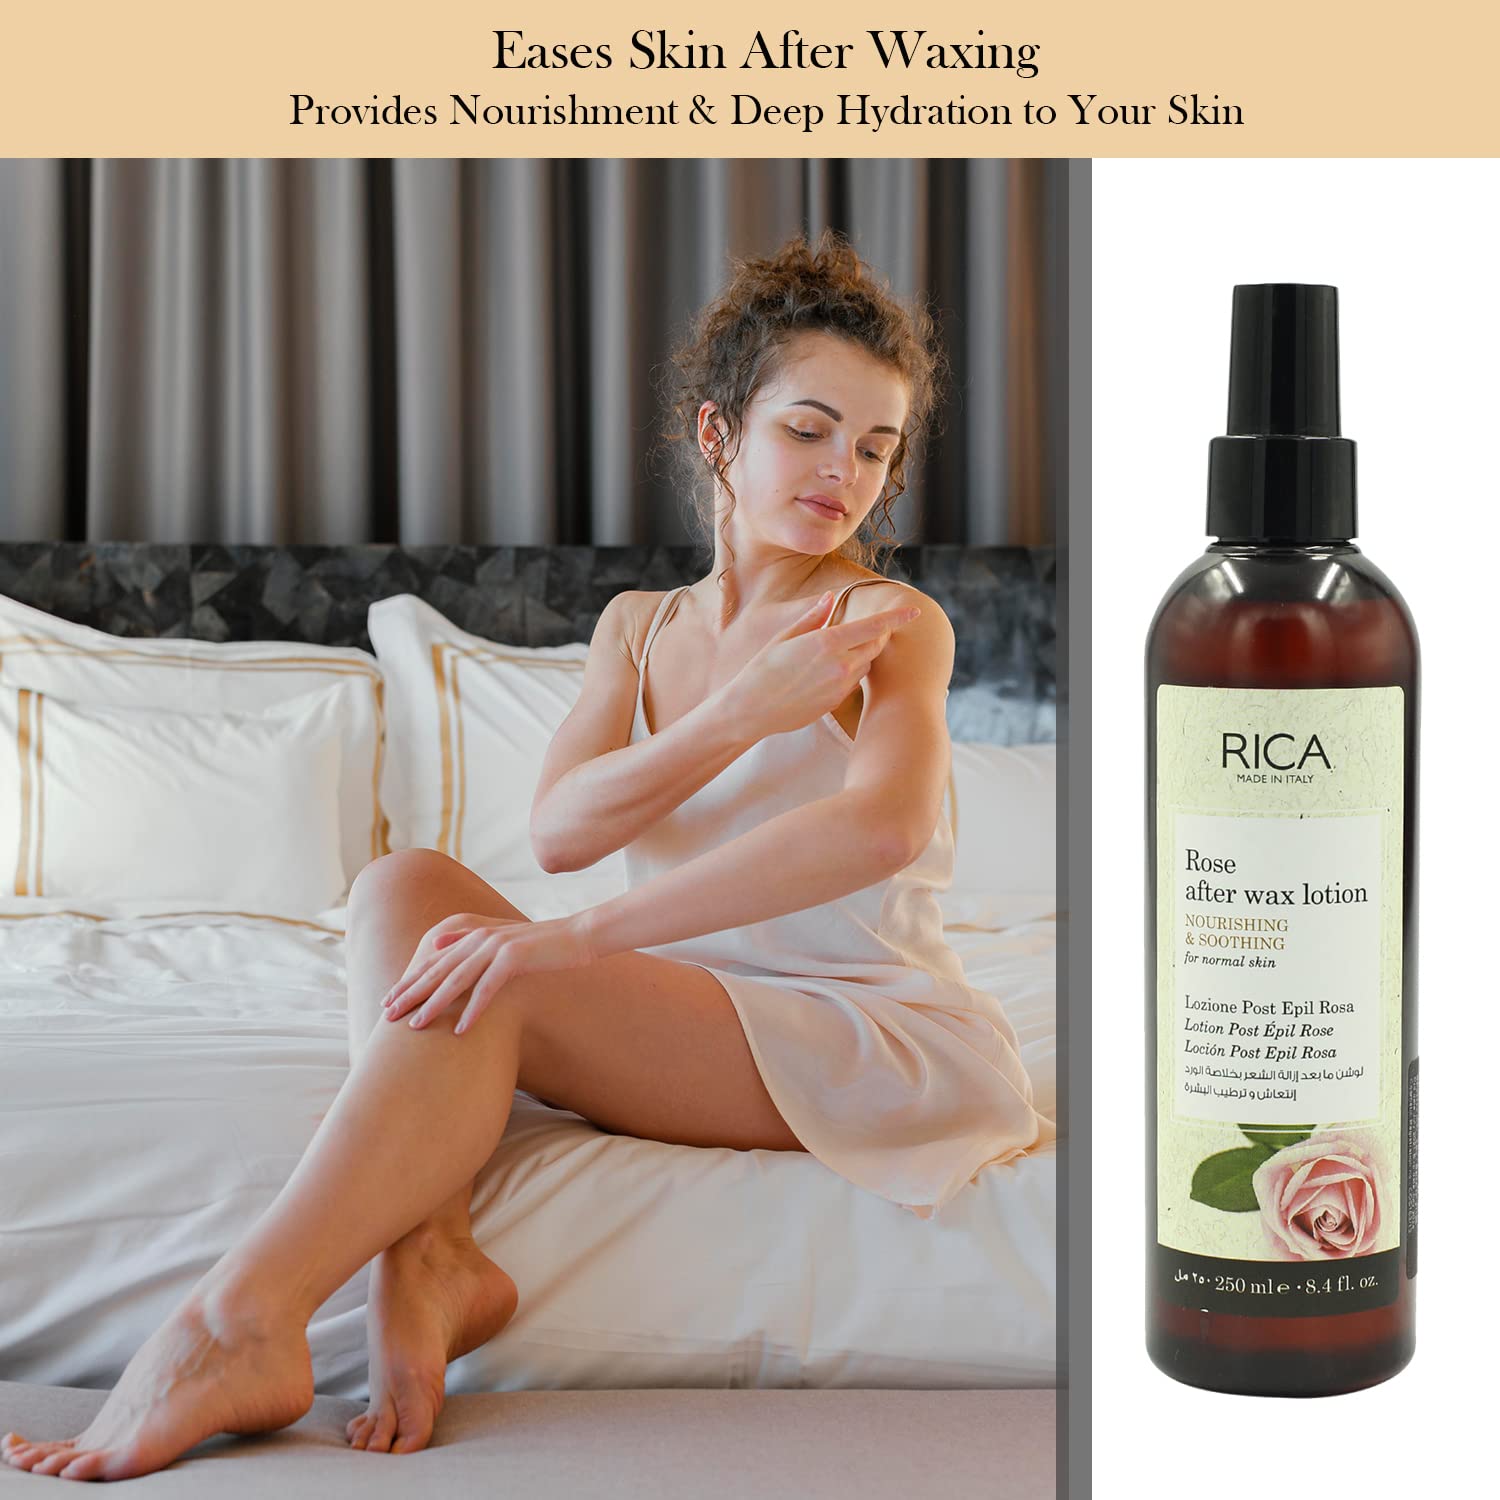 Rica Rose After Wax Lotion